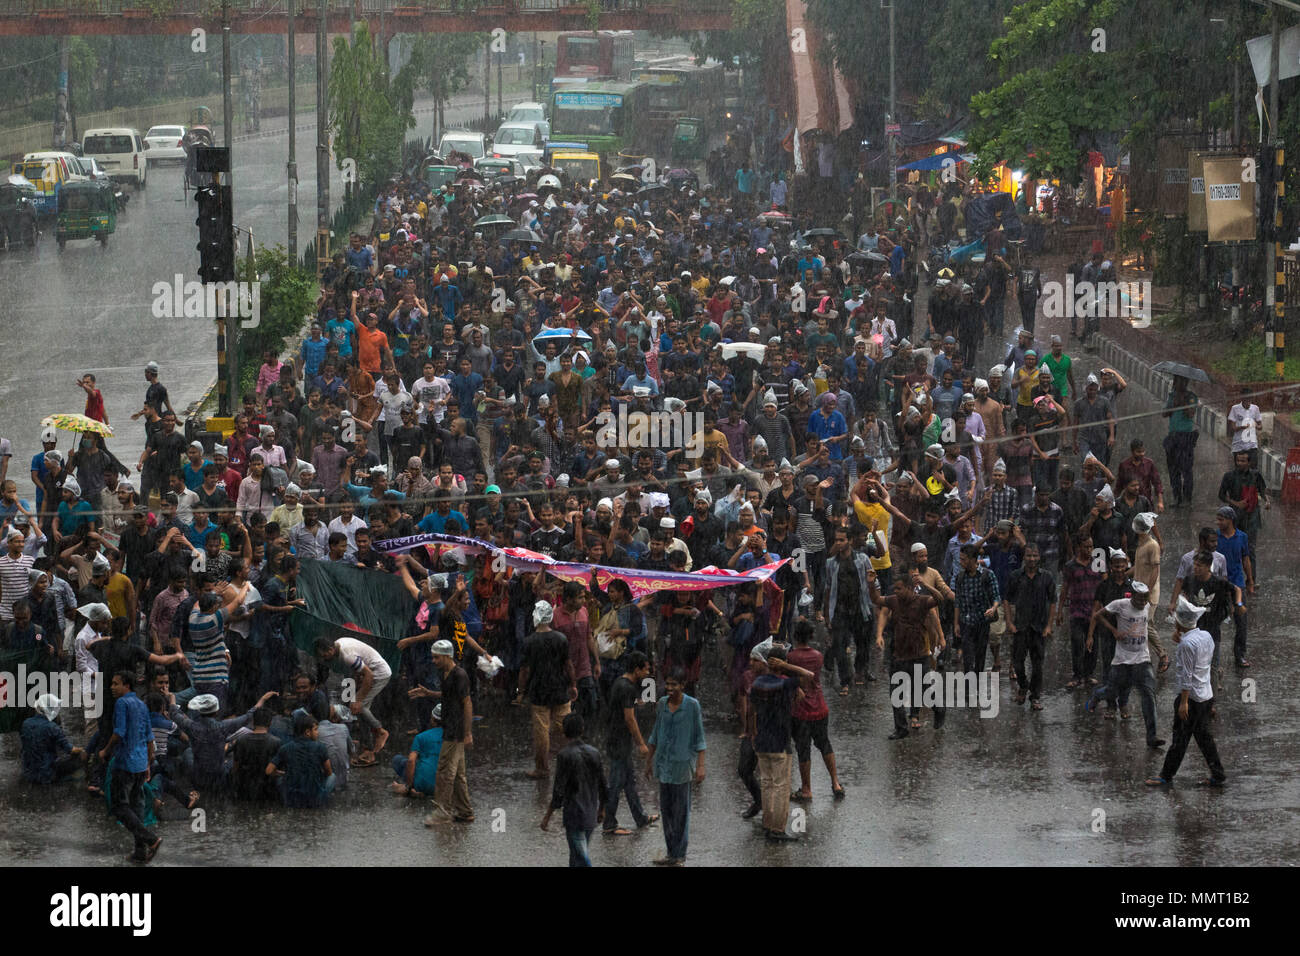 Dhaka, Bangladesh. 13th May 2018. Bangladeshi students made protest for removing or reforming a quota system in government jobs in Dhaka, Bangladesh, on May 13, 2018. Their demands include bringing down the existing 56% quota to 10%, introducing a unified age limit in government services, reviewing the quota system in recruitment processes including Bangladesh Civil Services examinations, Credit: zakir hossain chowdhury zakir/Alamy Live News Stock Photo